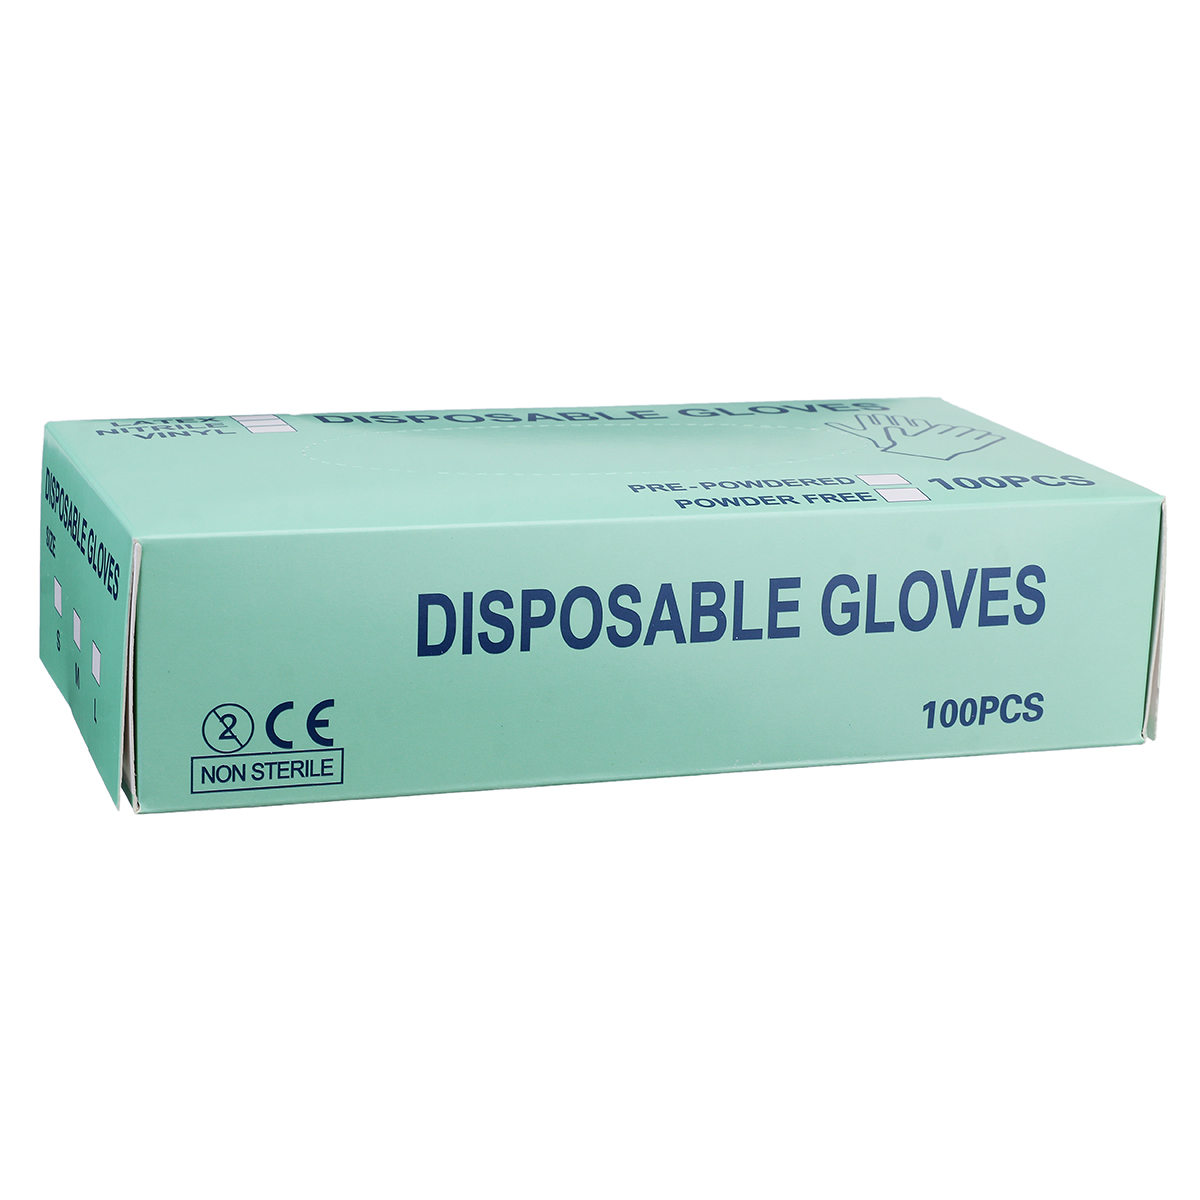 50Pairs-100Pcs-SML-Powder-Free-White-Disposable-Nitrile-Gloves-Suitable-For-Restaurant-Kitchen-Food--1688643-7